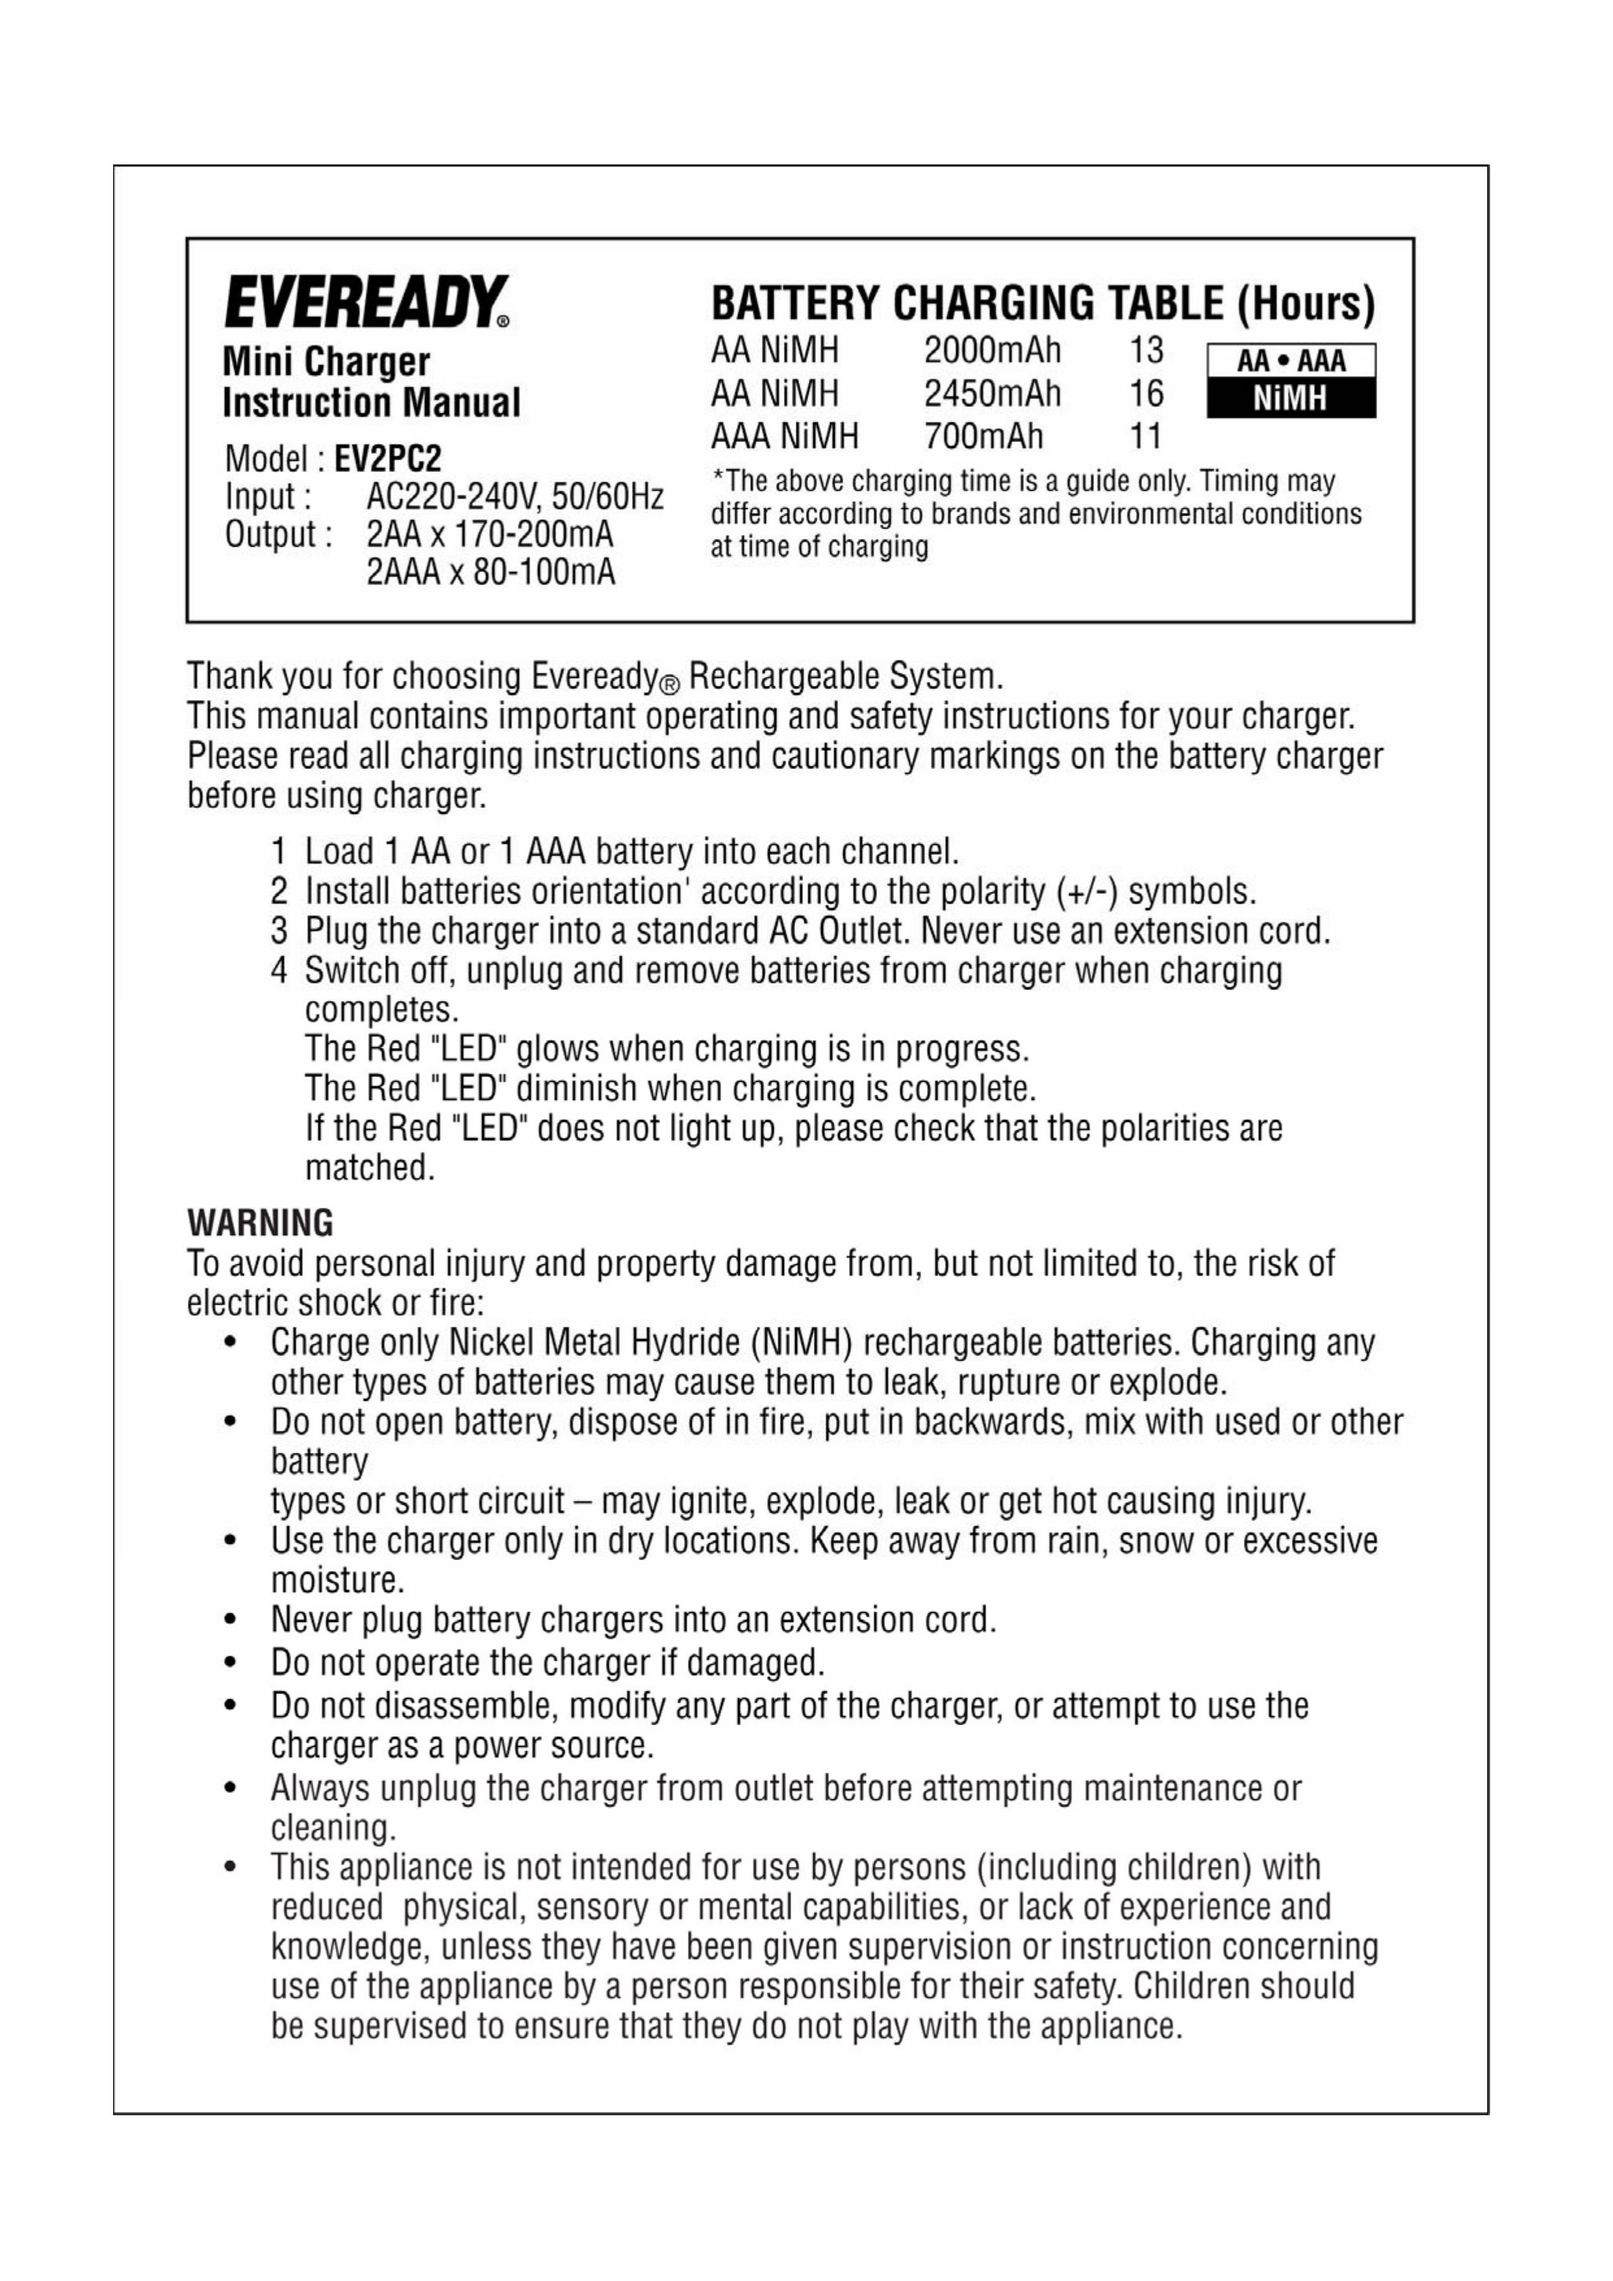 Eveready EV2PC2 Battery Charger User Manual